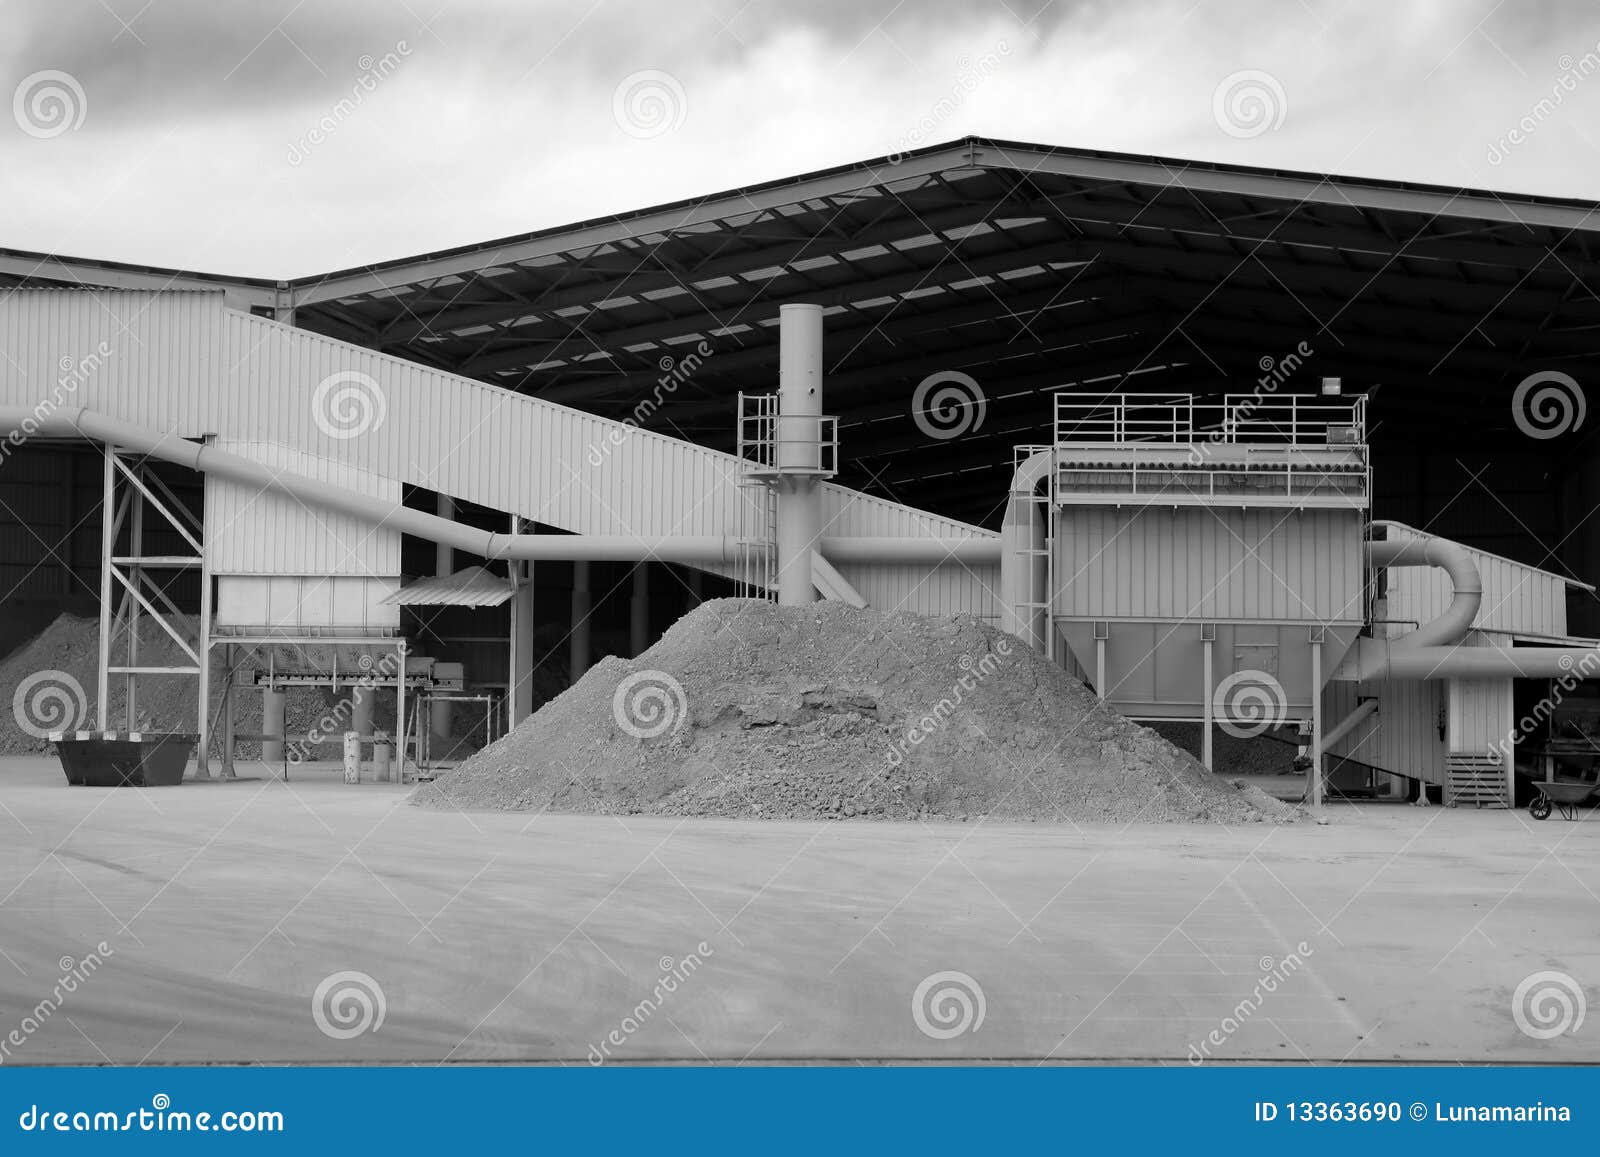 aggregates and gravel stones